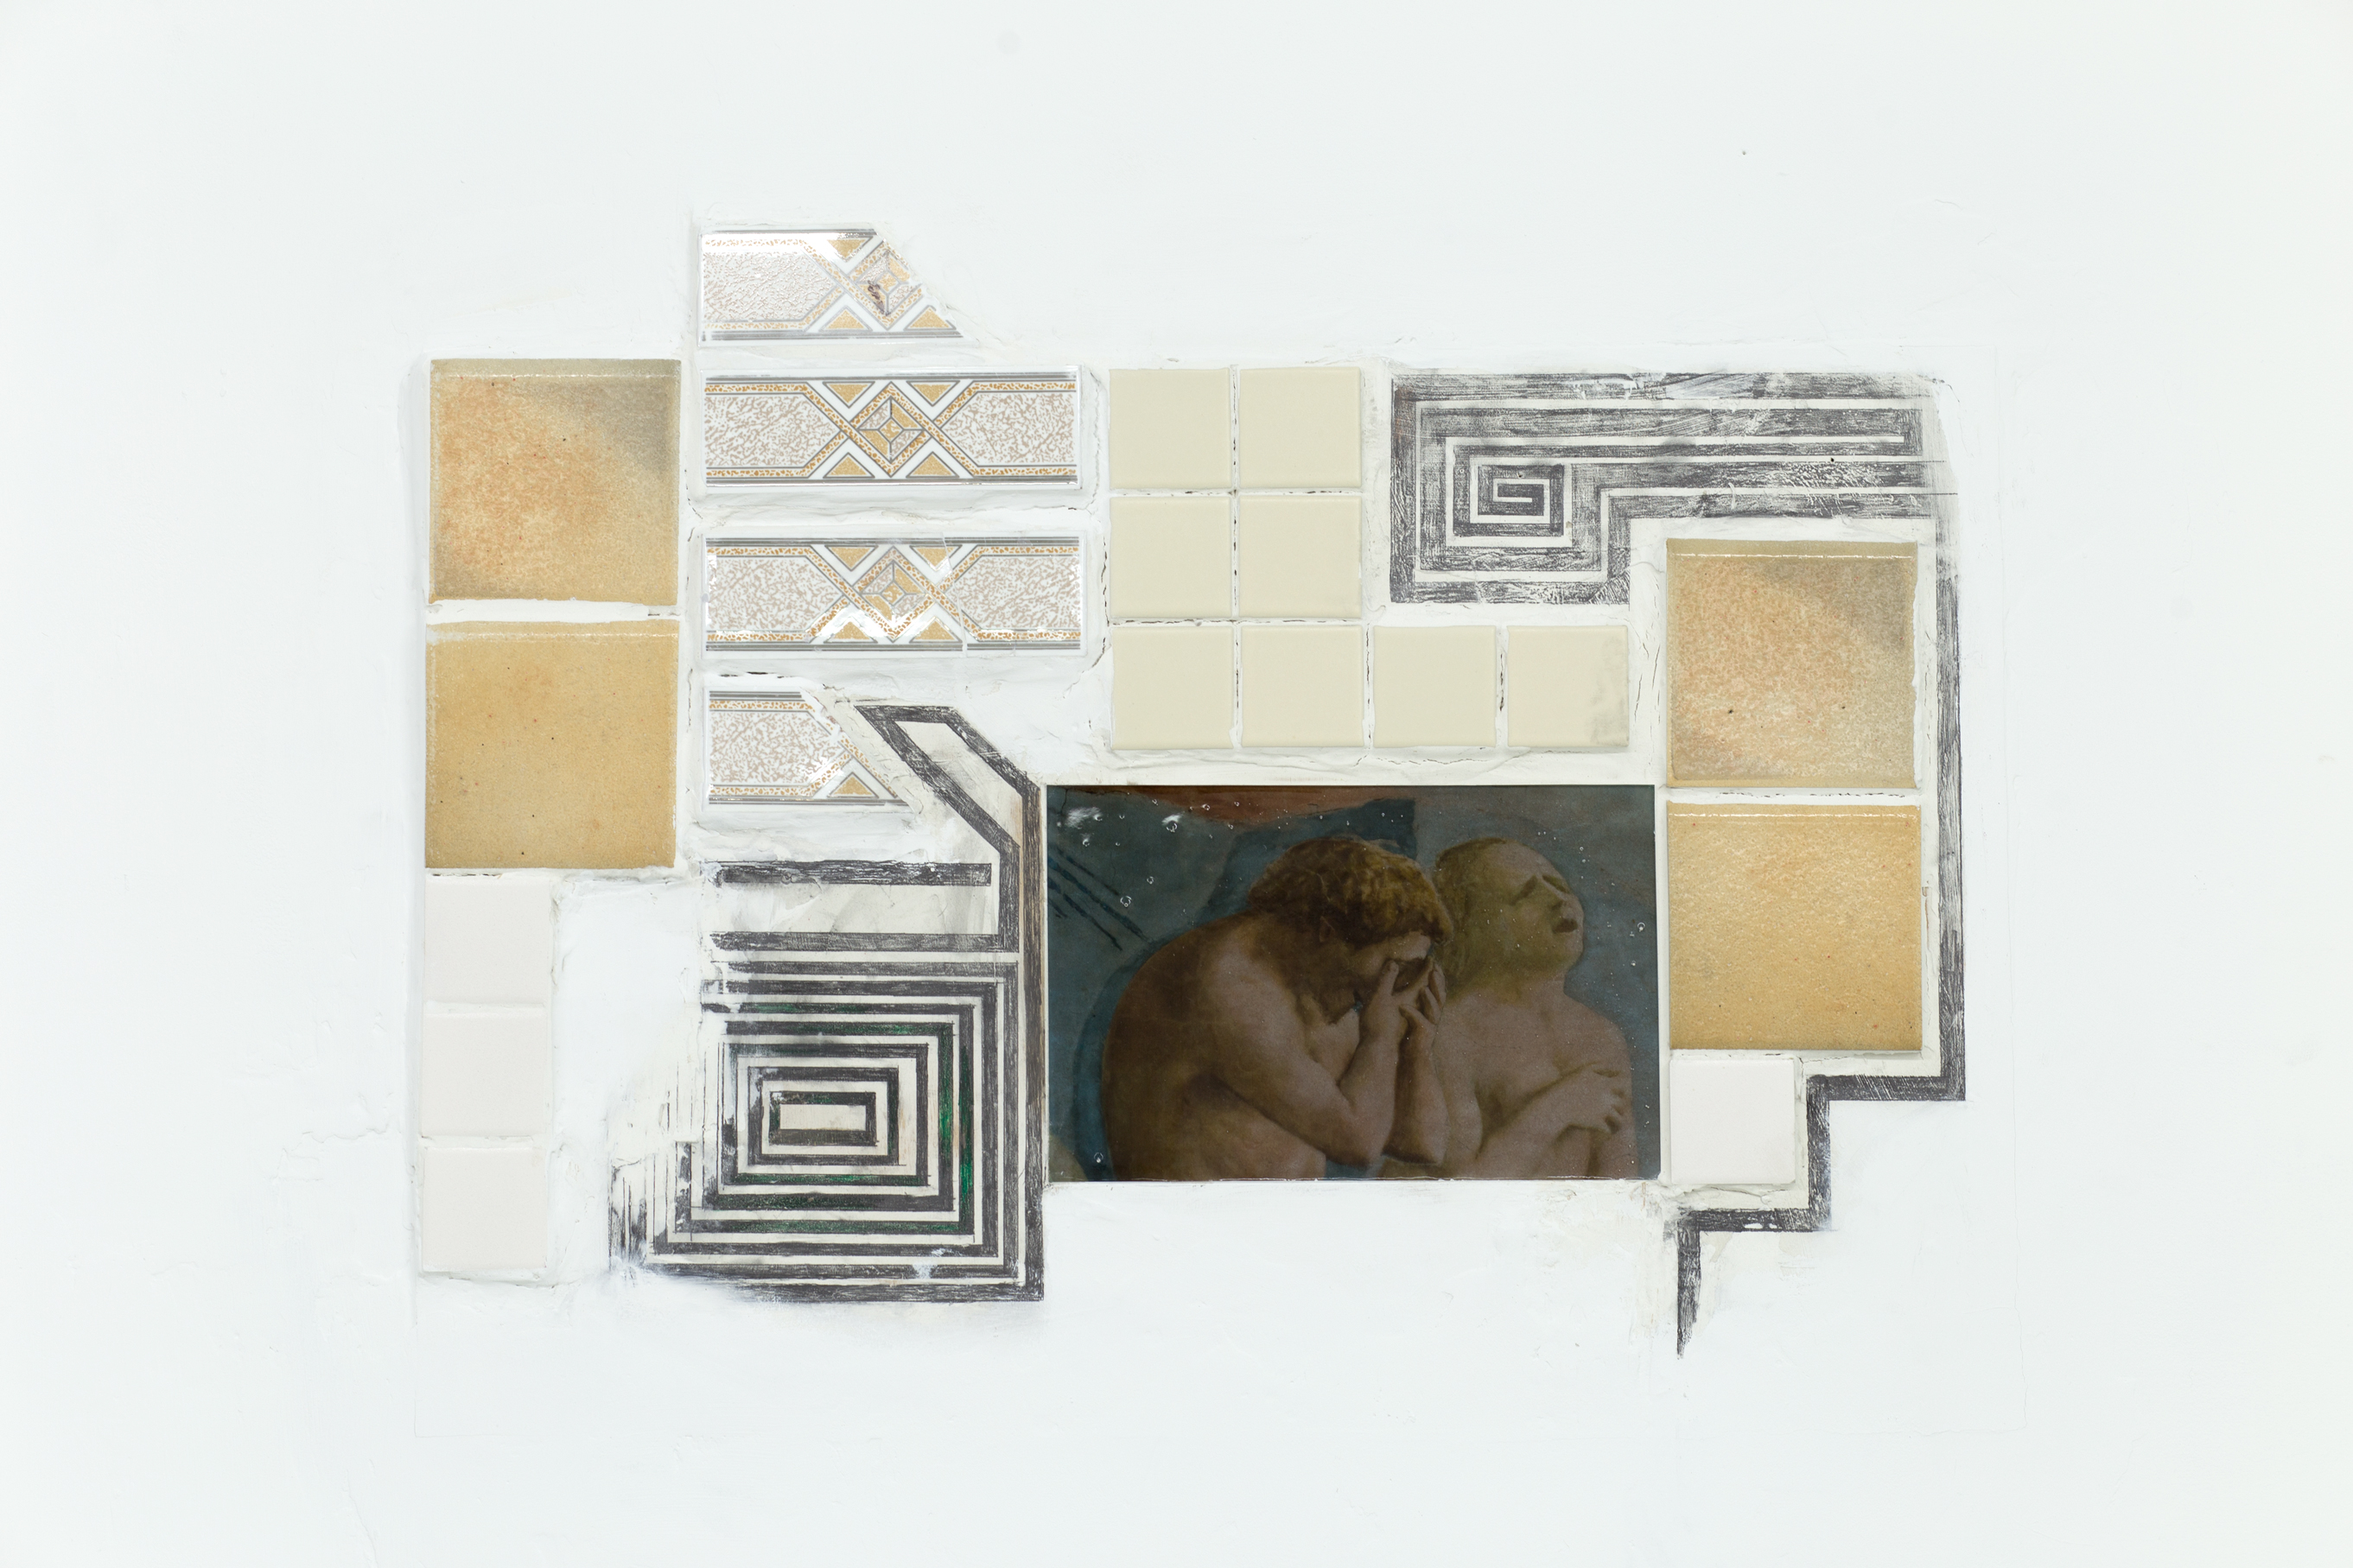 A tile collage with some patterns drawn in graphite is set directly into the drywall